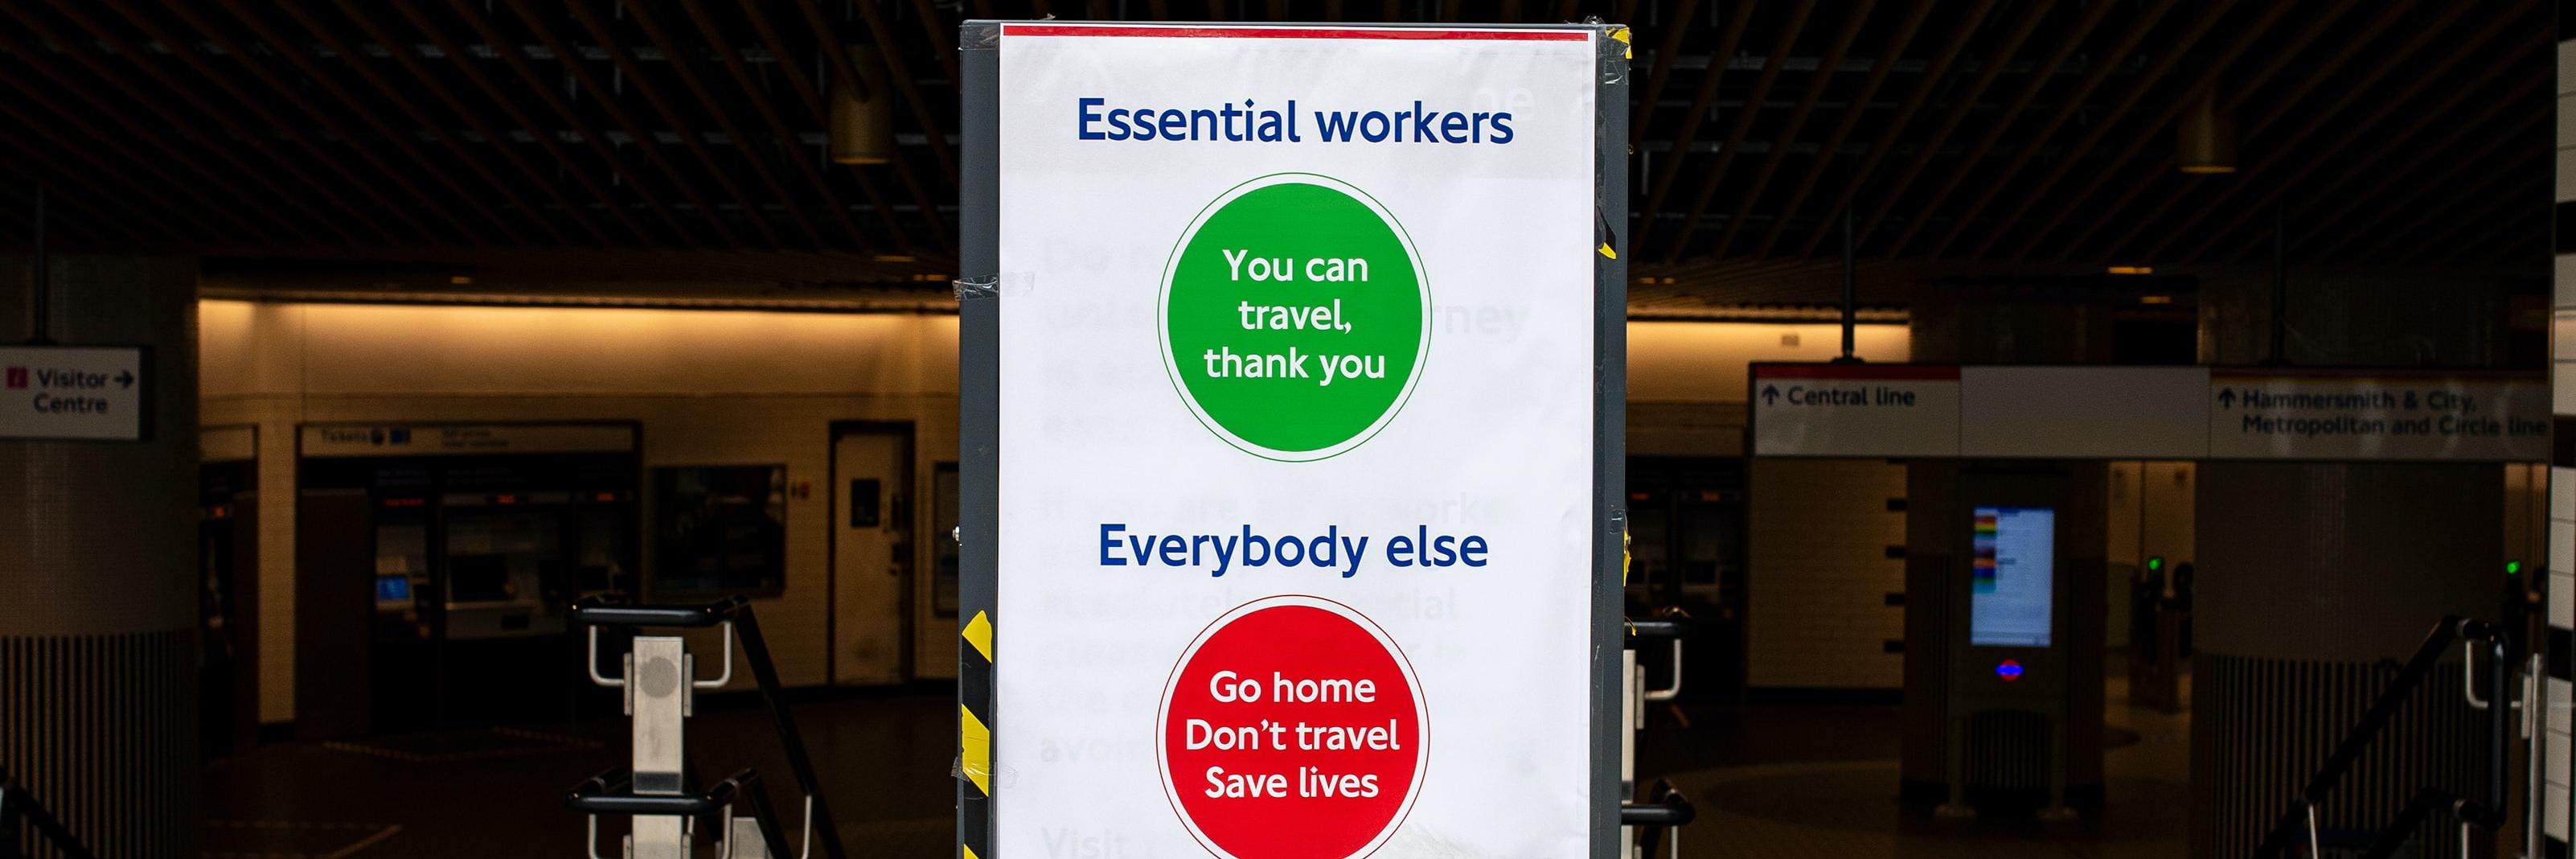 empathy sign for workers